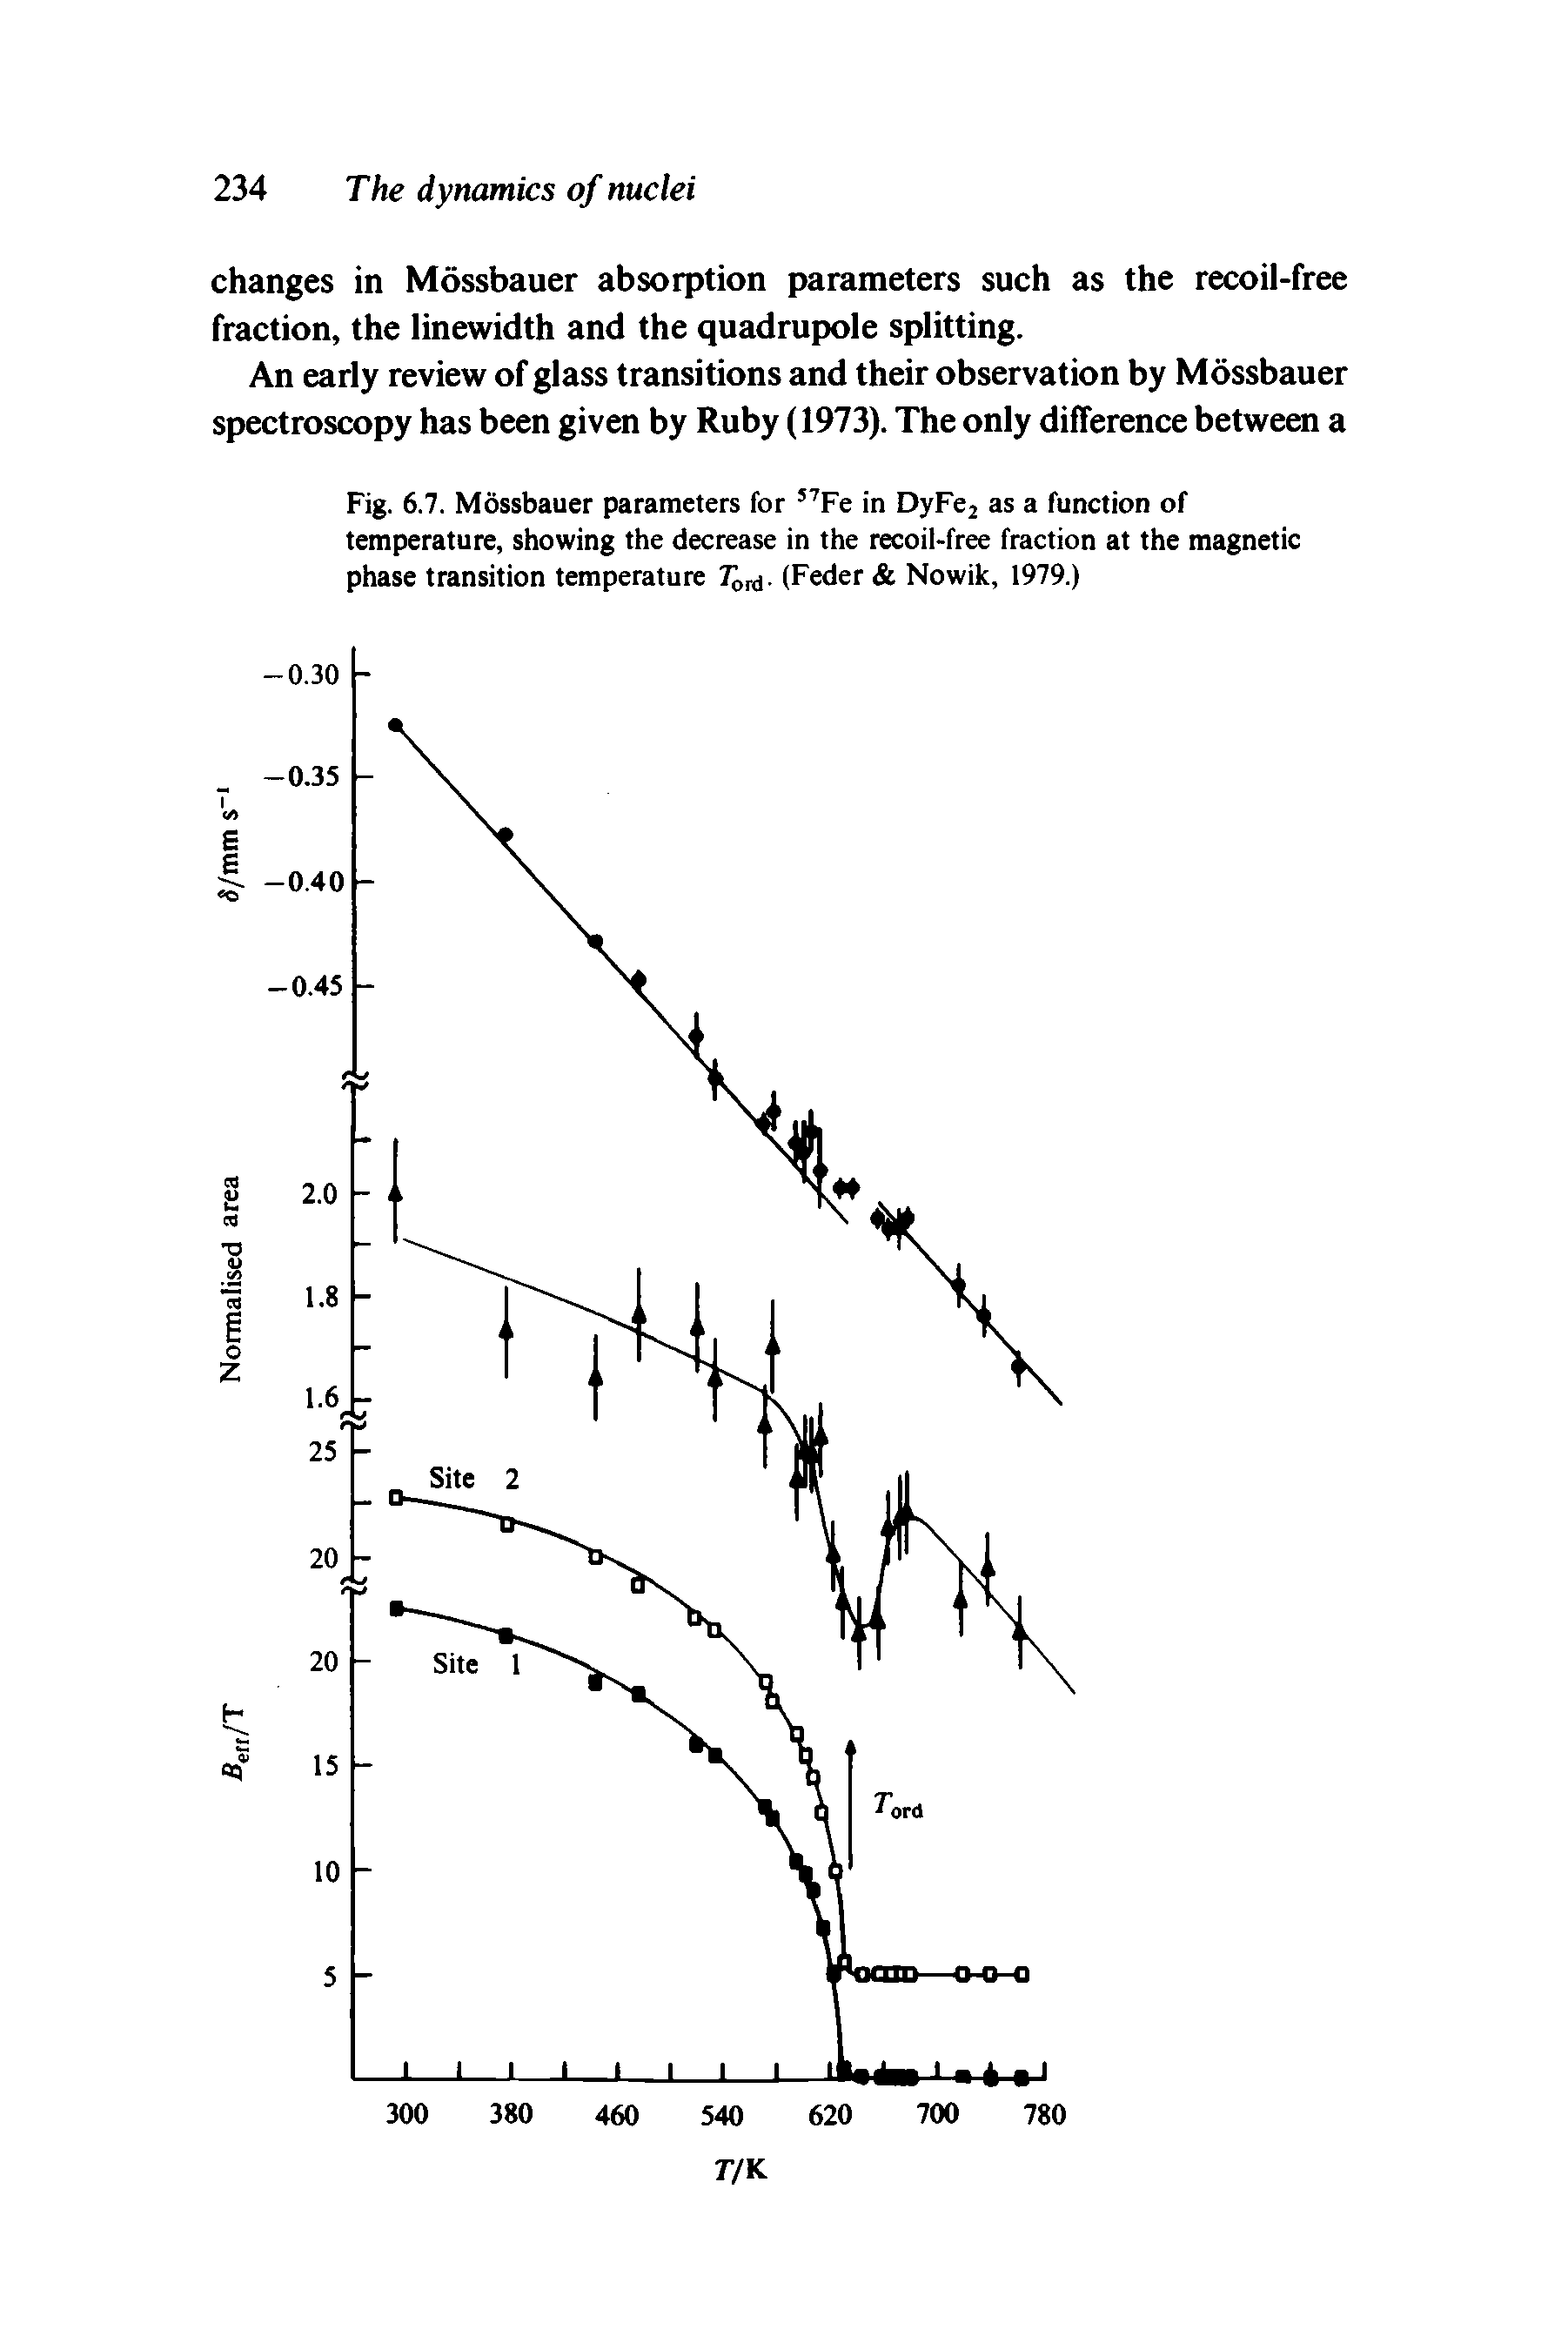 Fig. 6.7. Mossbauer parameters for Fe in DyFe as a function of temperature, showing the decrease in the recoil-free fraction at the magnetic phase transition temperature 7i . (Feder Nowik, 1979.)...